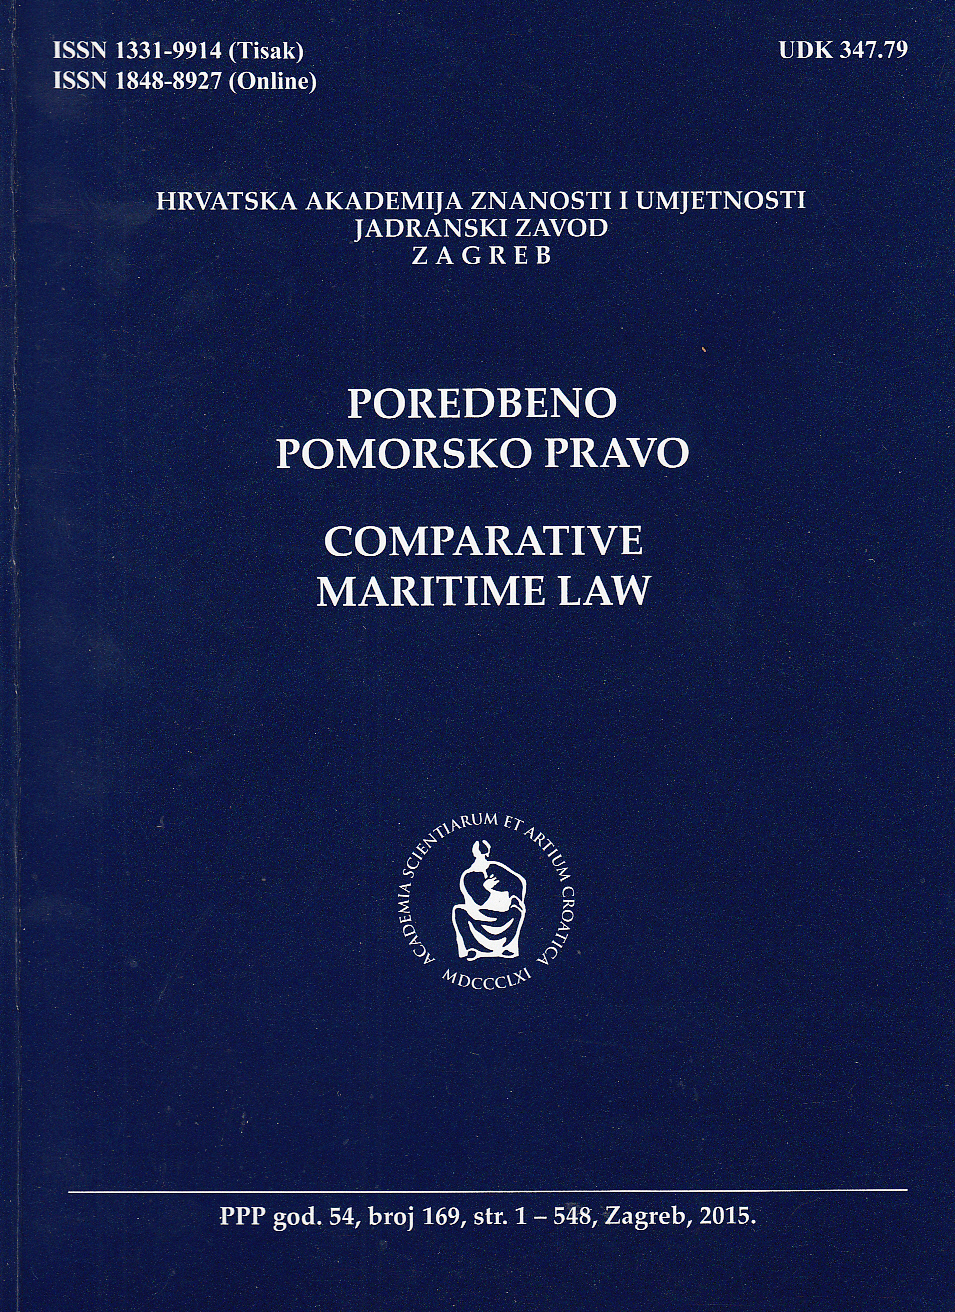 The problem of the real property rights on the maritime domain : Essential news in the Croatian maritime legislation Cover Image